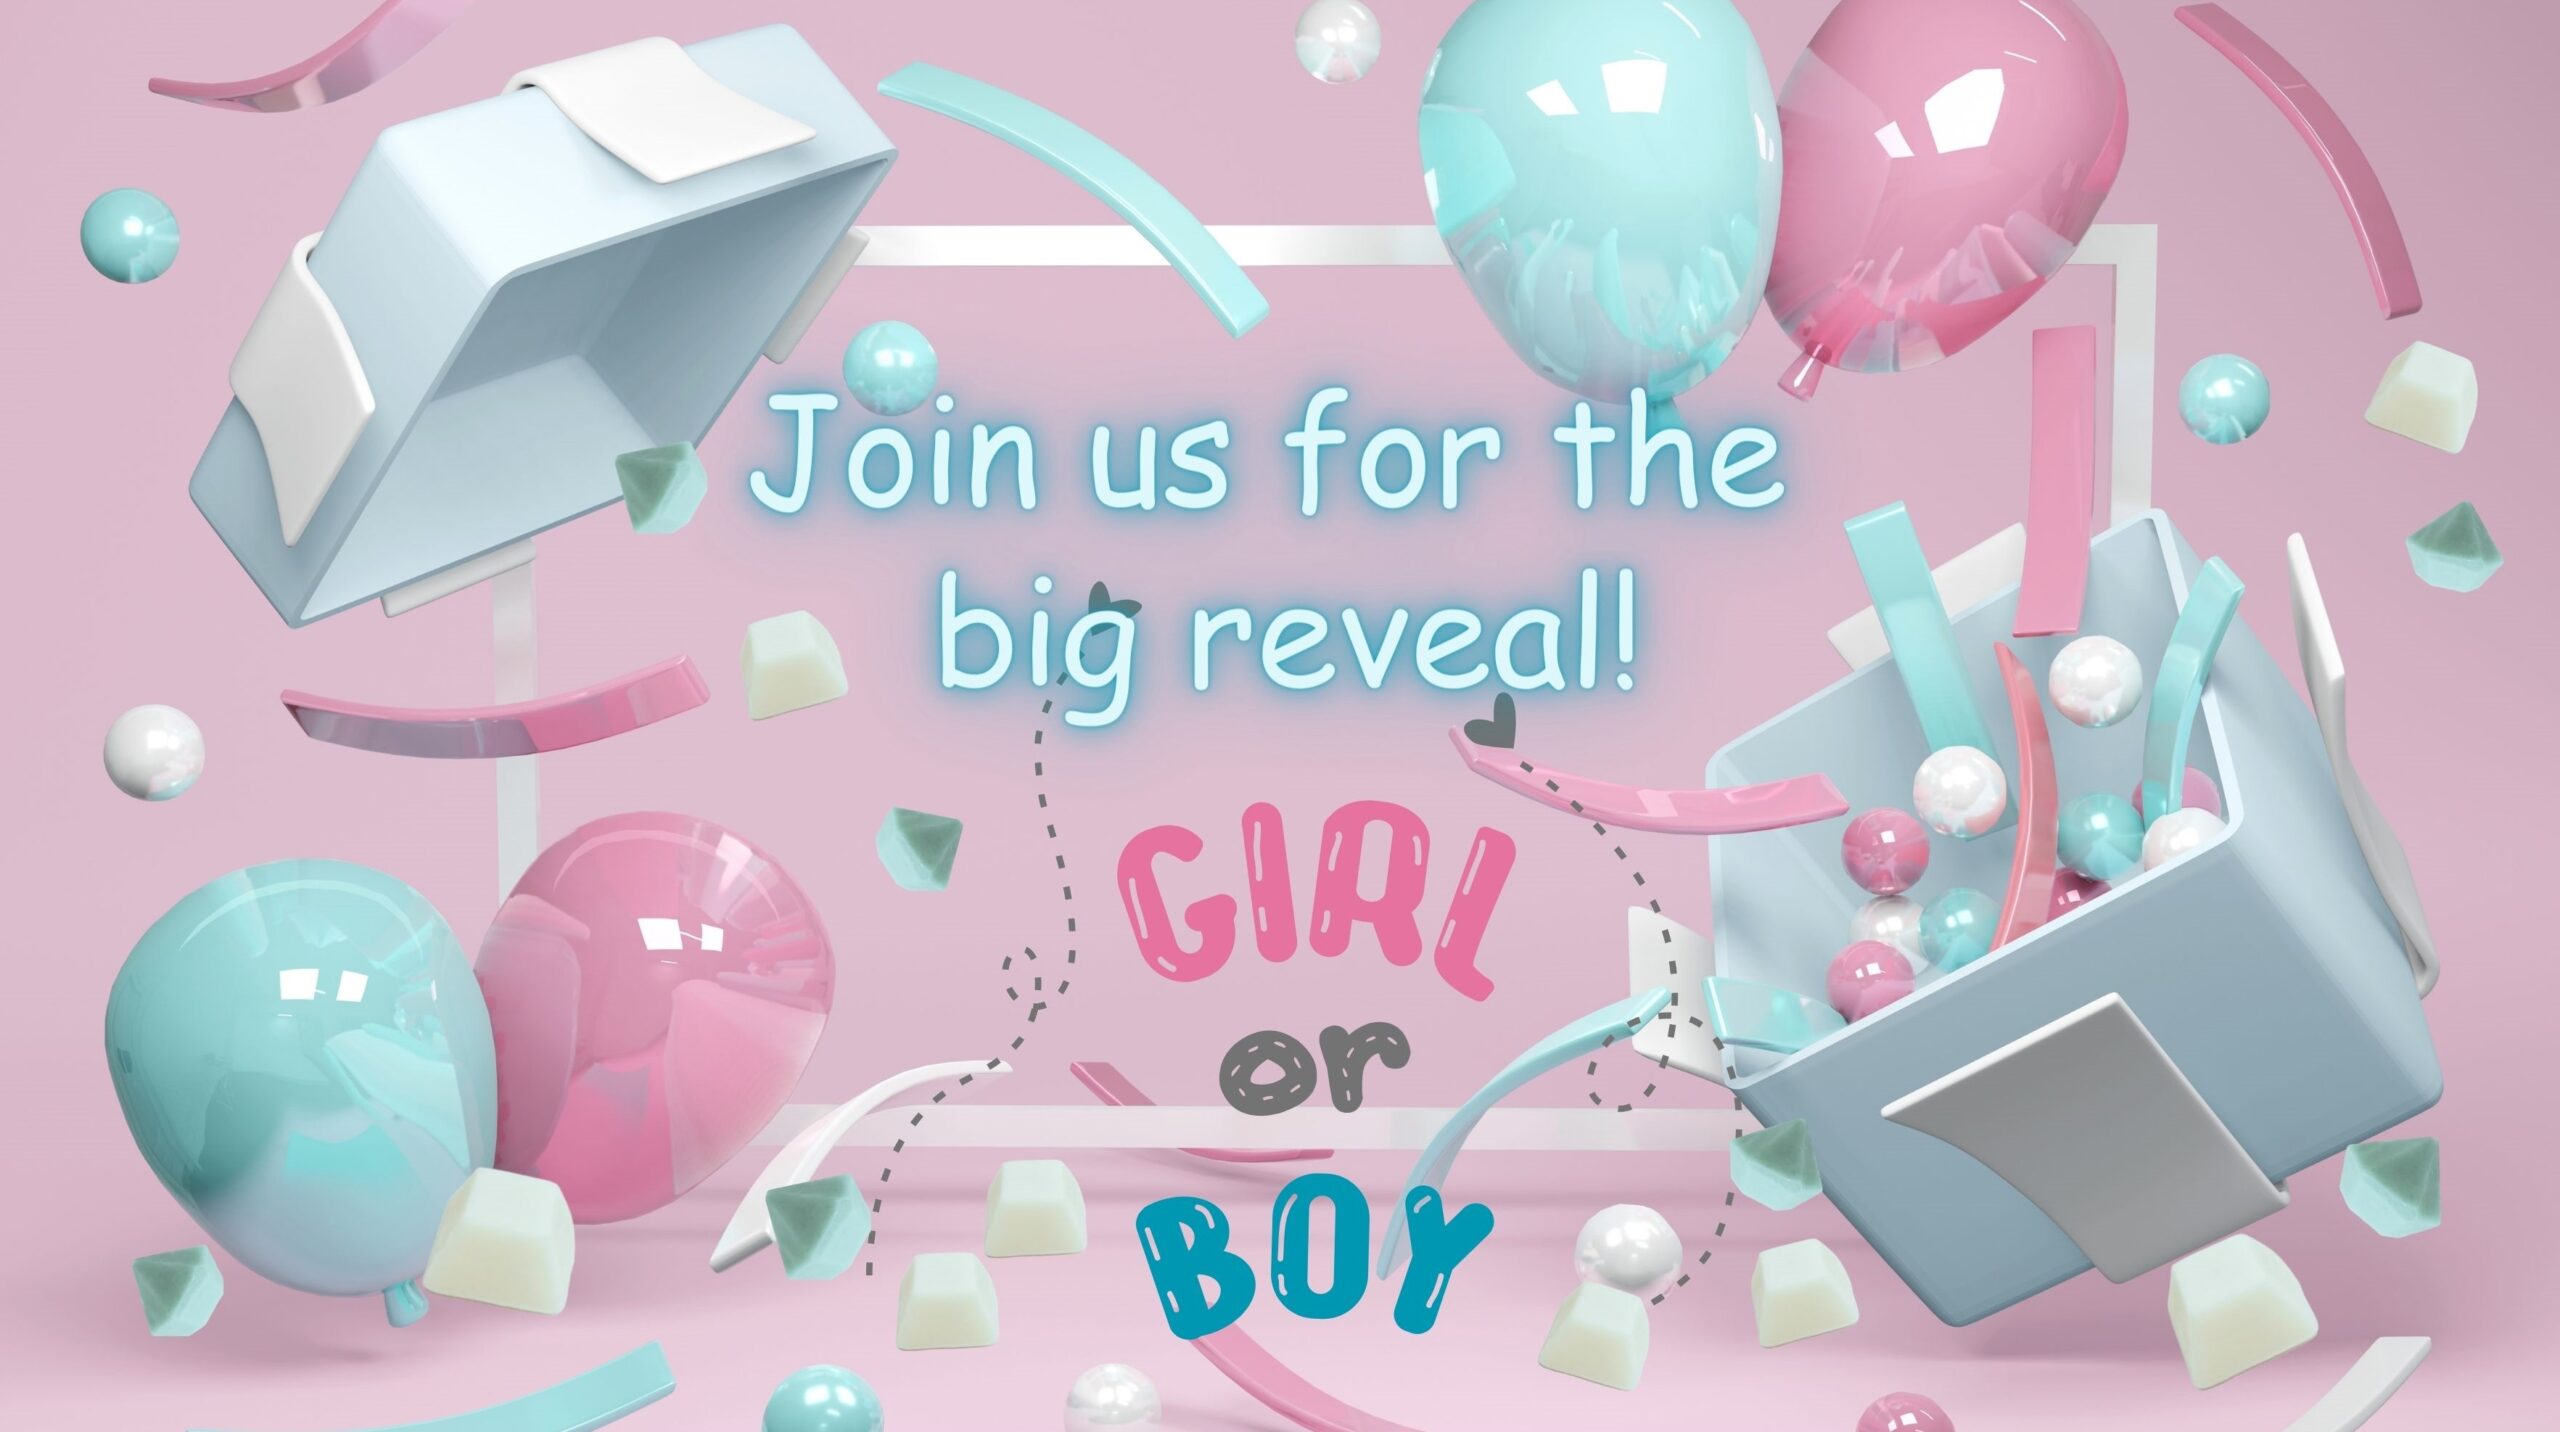 Join us for the big reveal! - 4